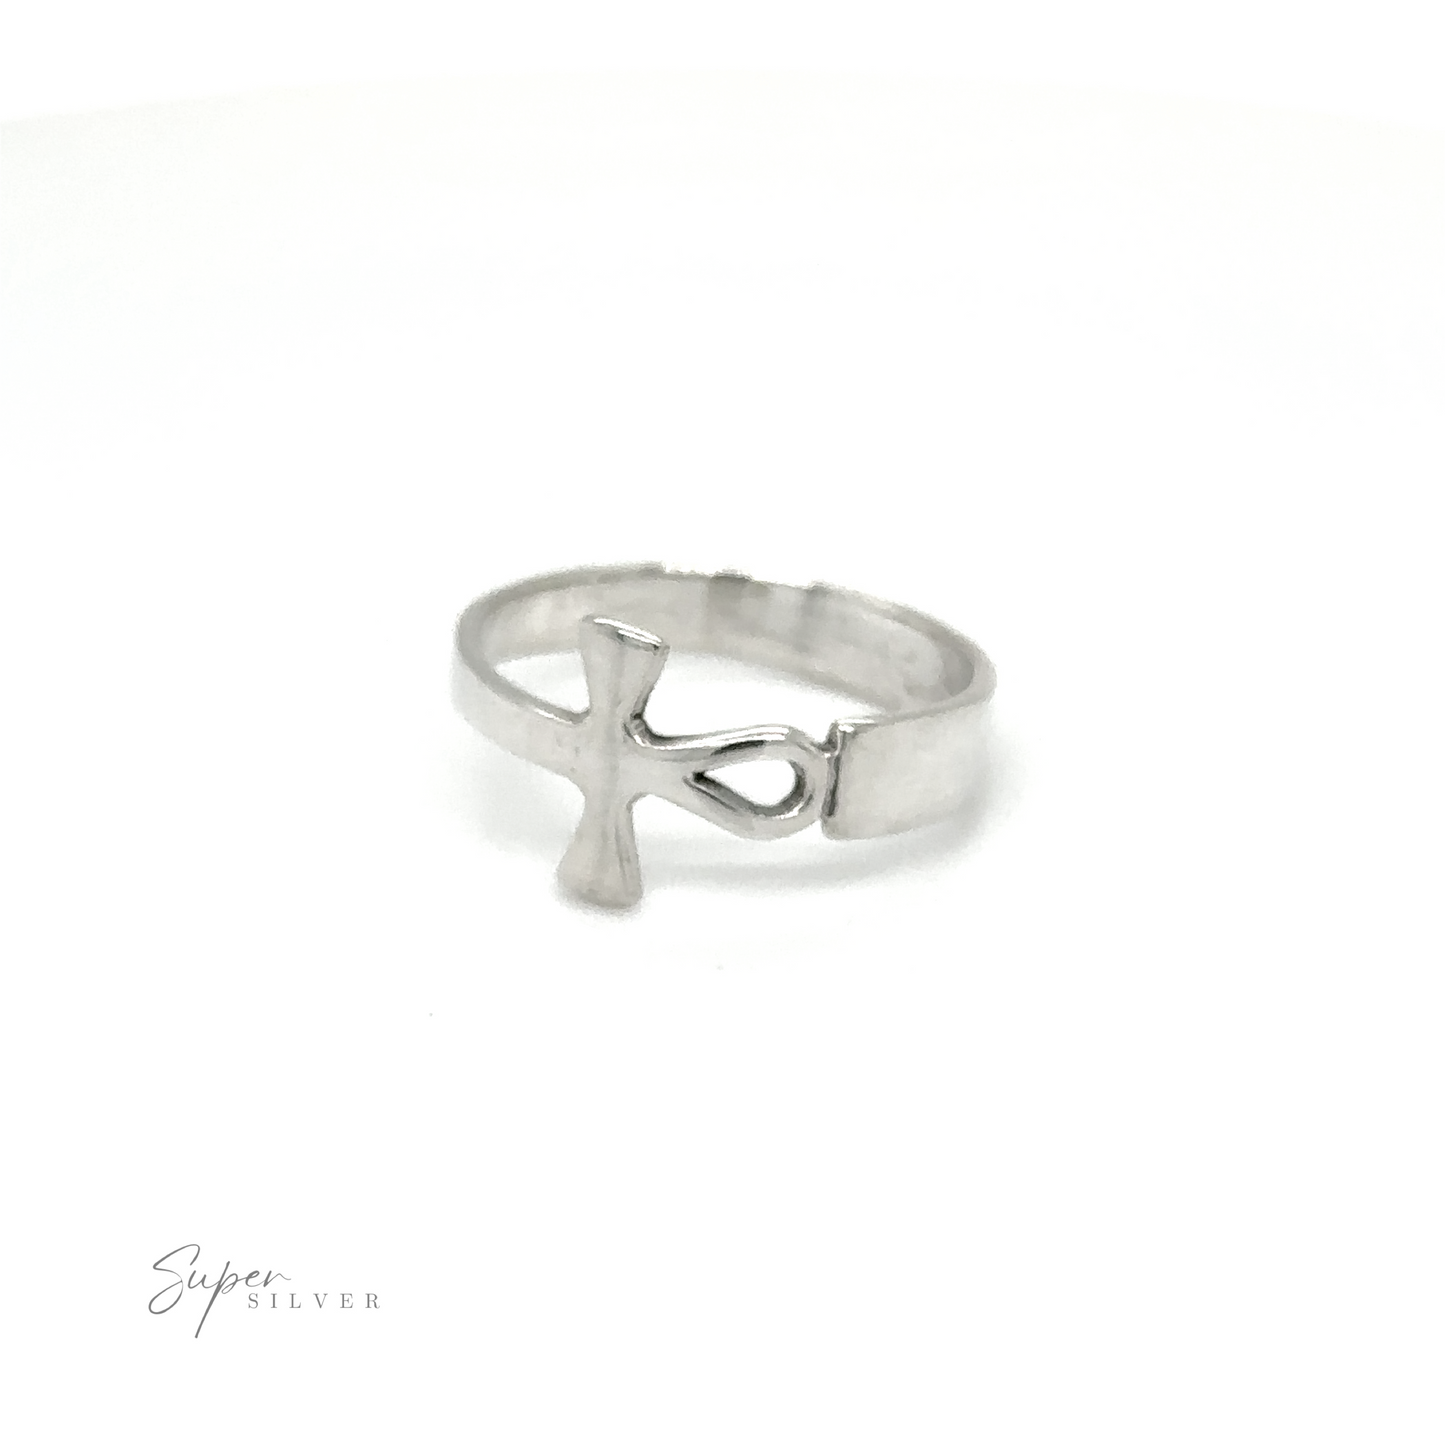 A silver Sideways Connecting Ankh ring with a minimalist design and eternal style.